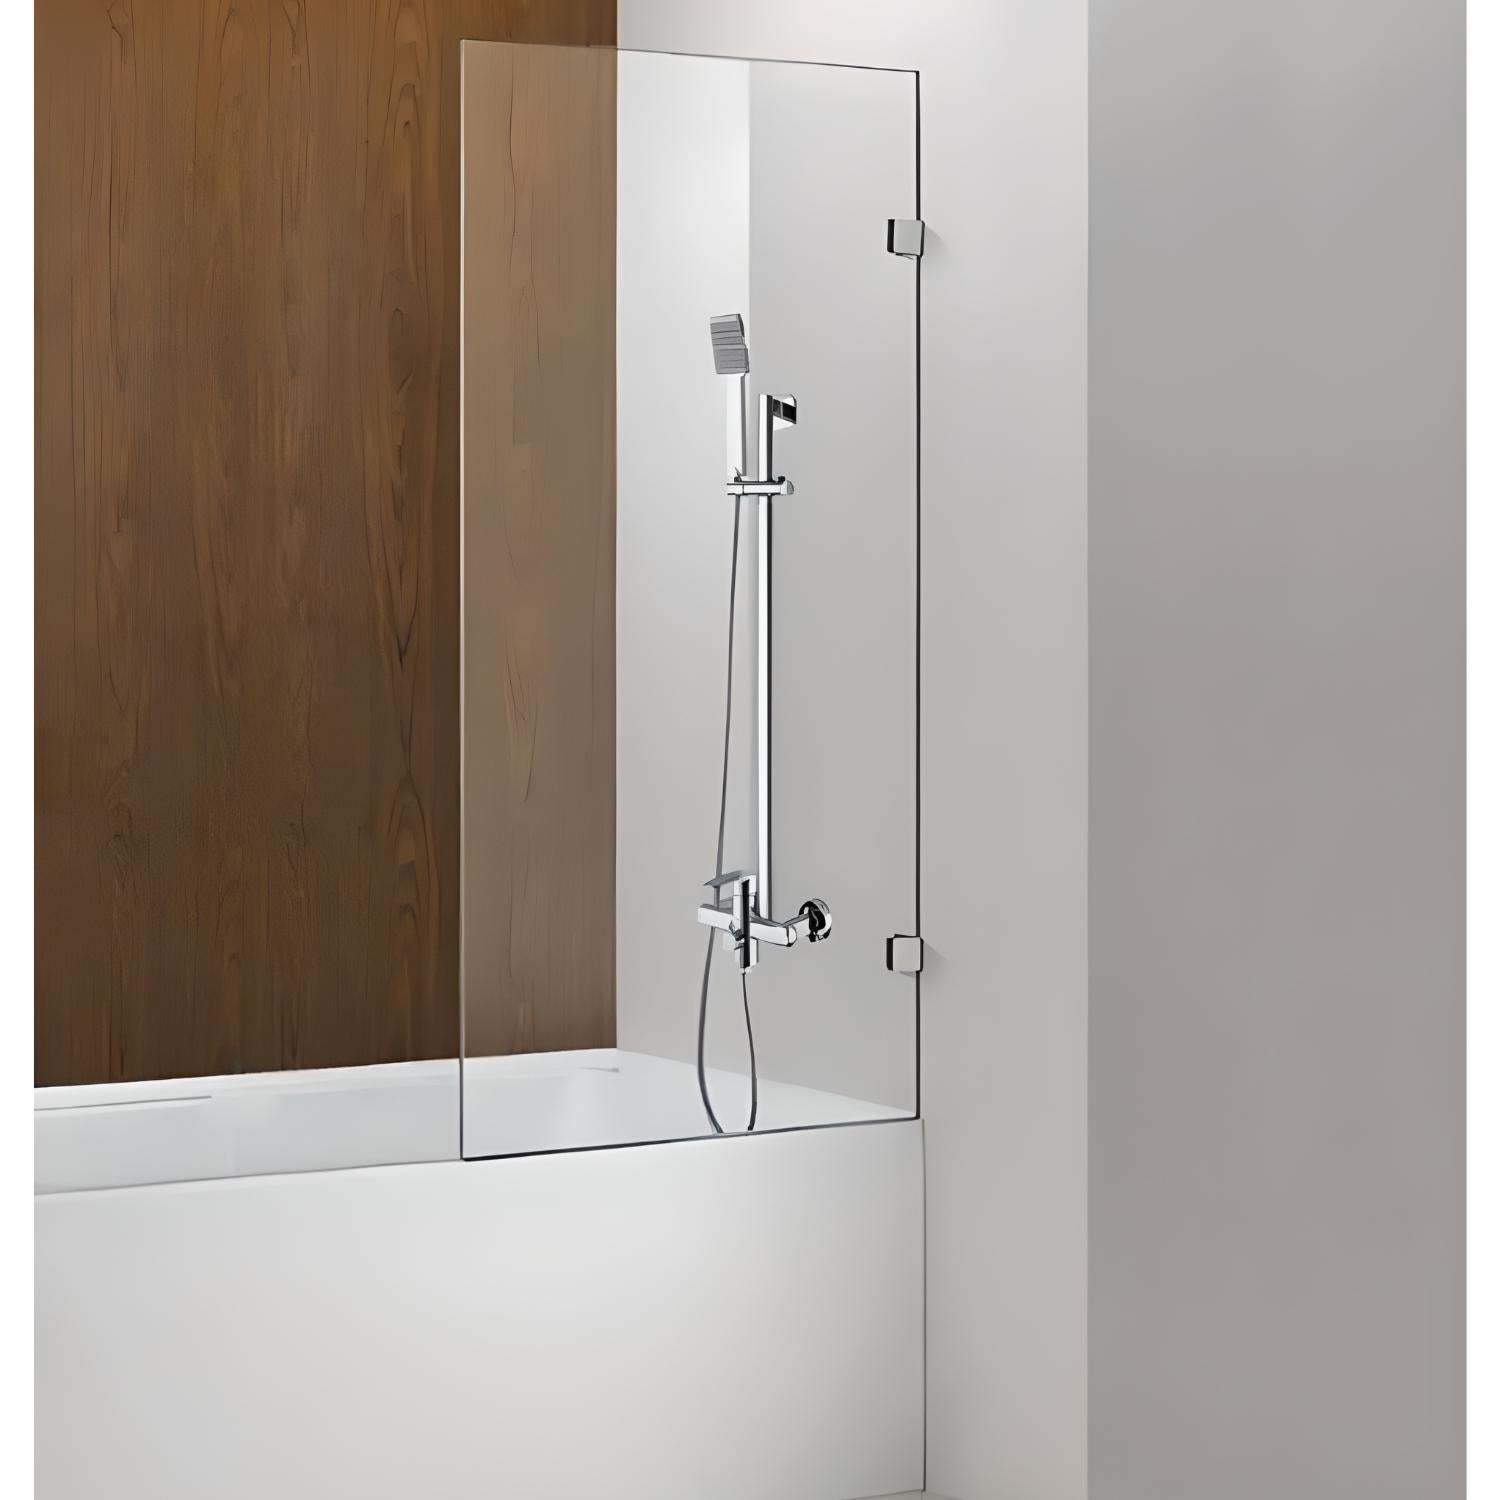 COVEY FIXED PANEL OVER BATHTUB SCREEN BRUSHED NICKEL